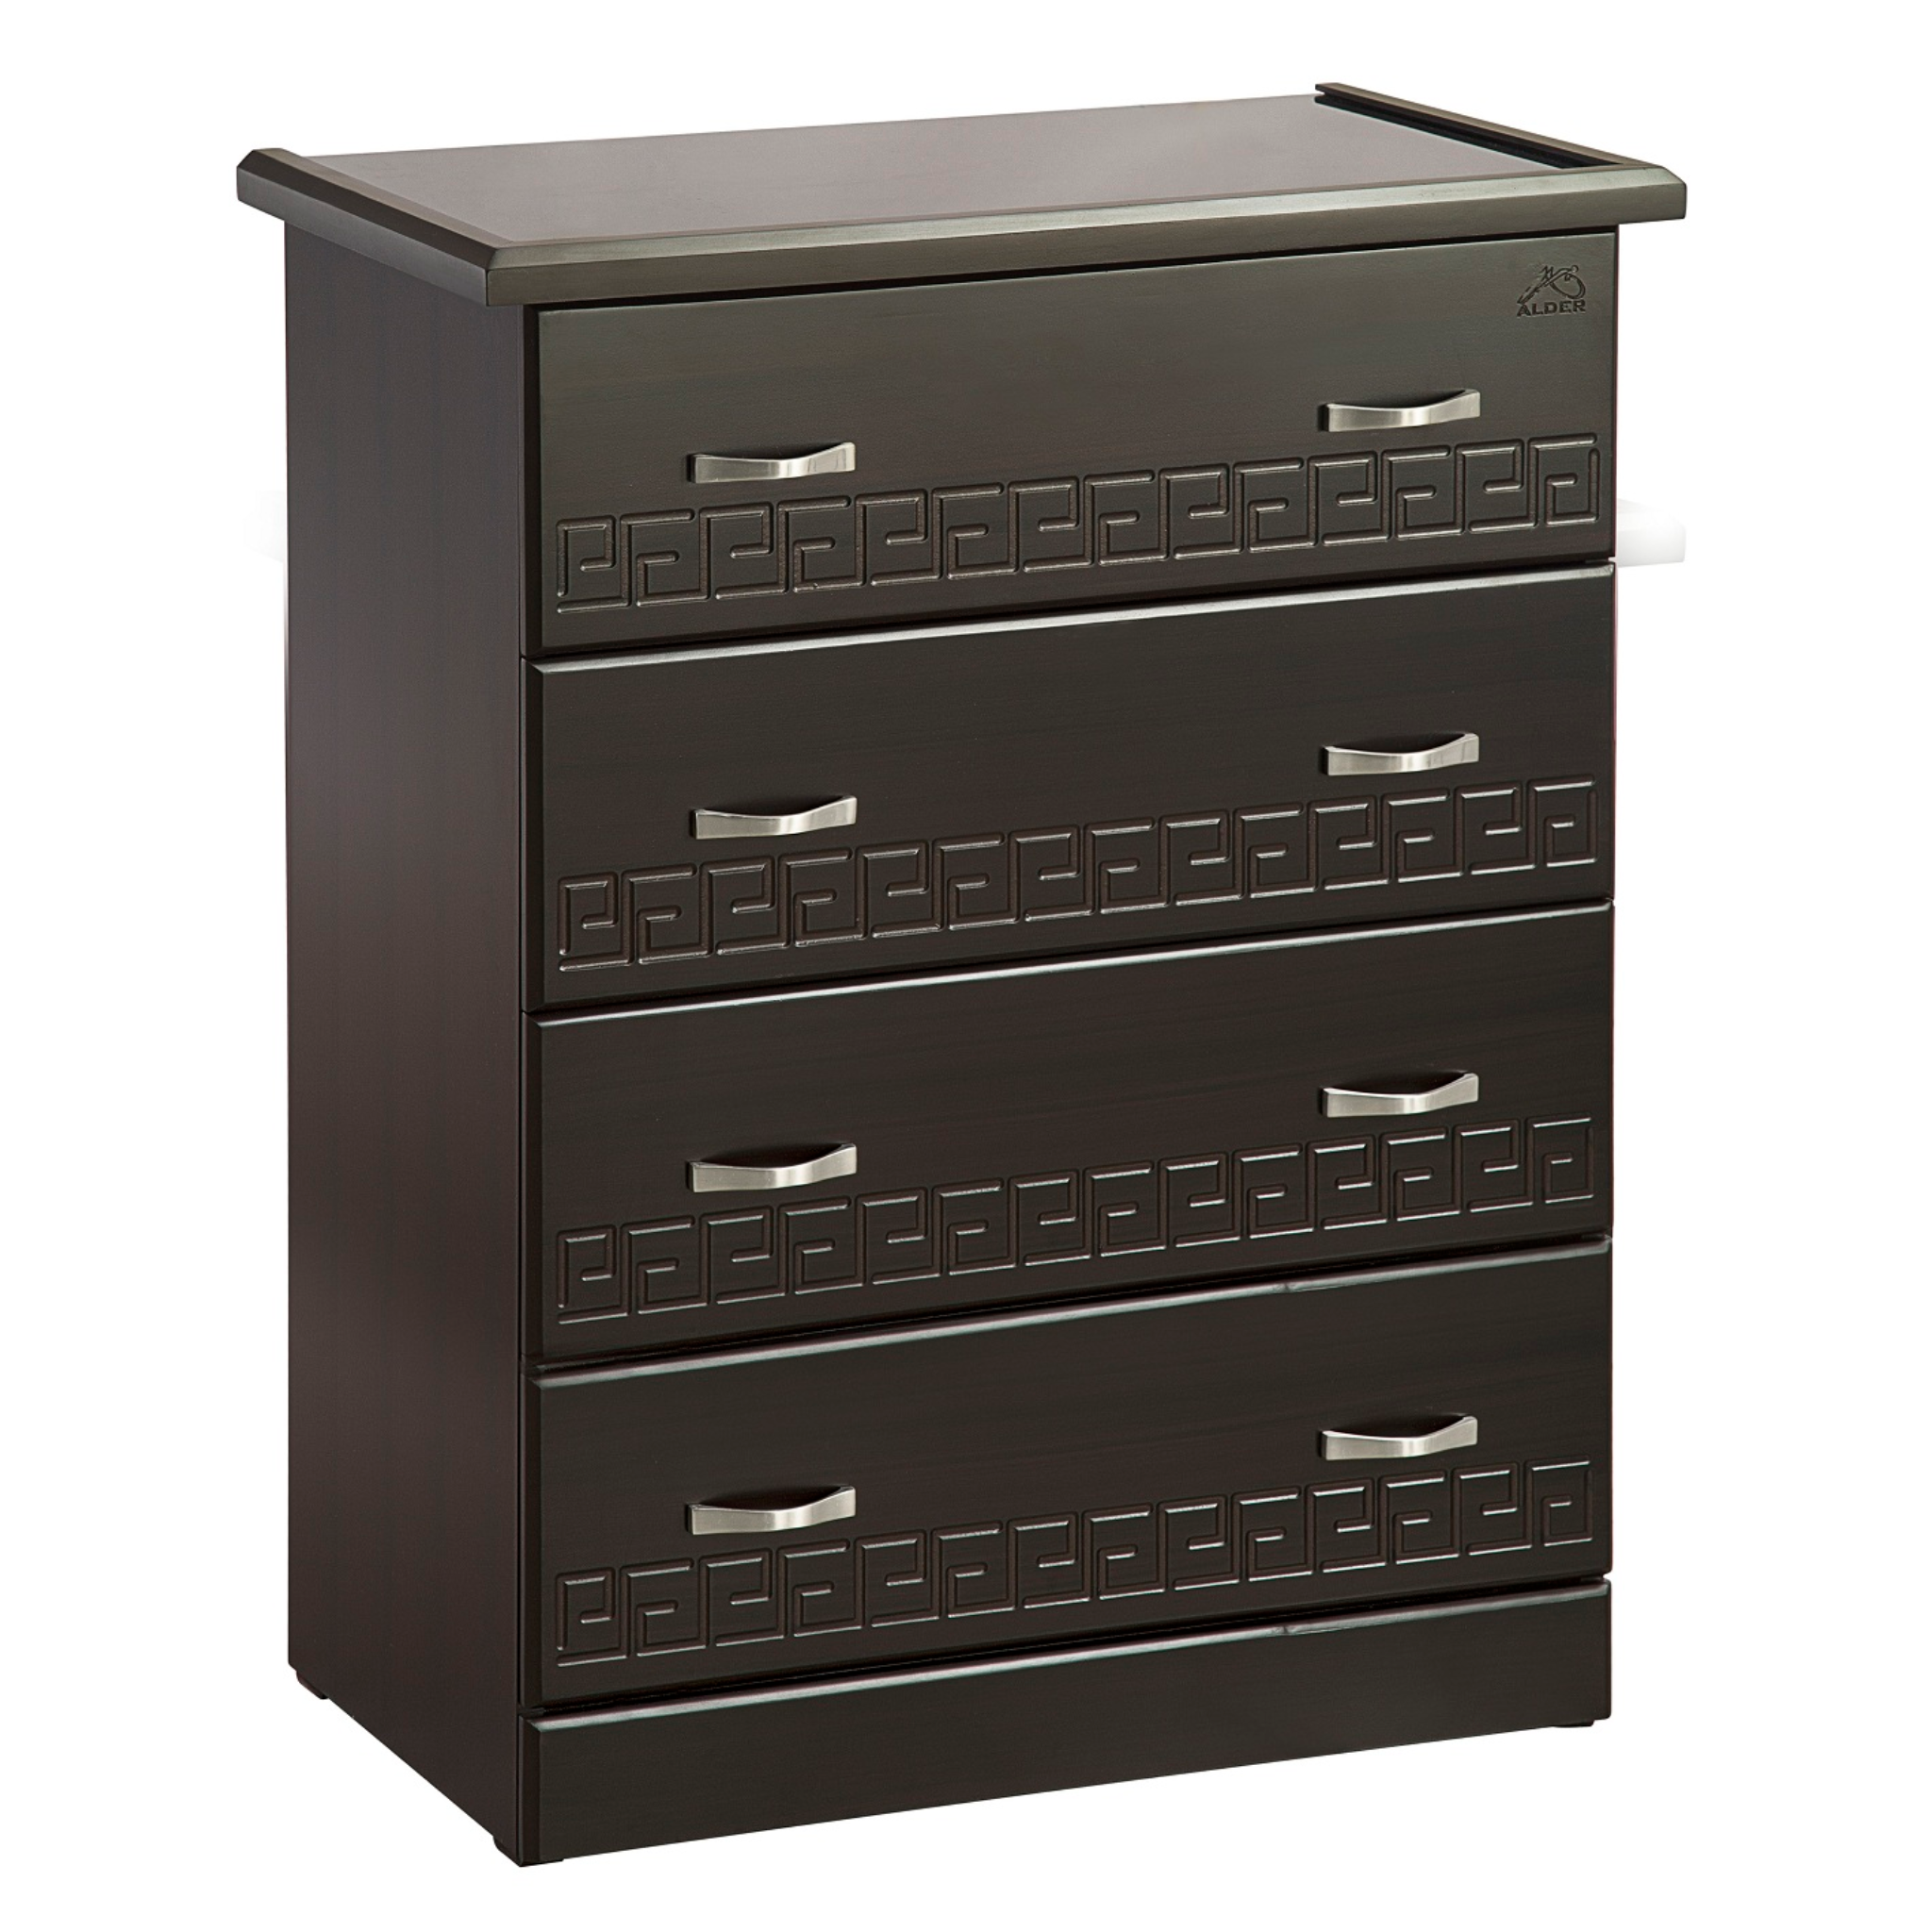 Multiutility Cabinets - 4 DR